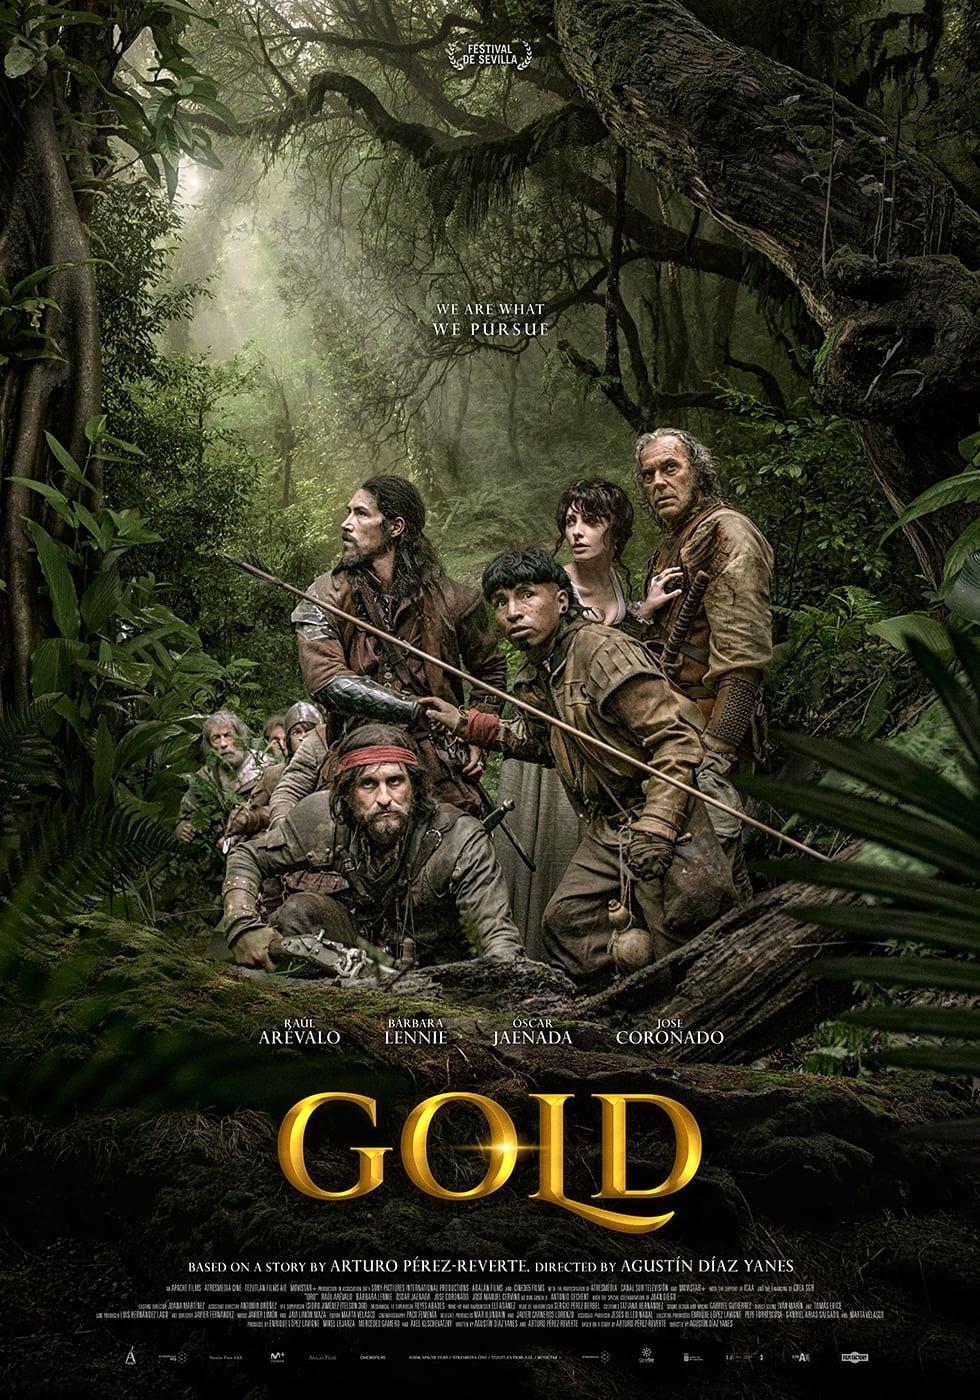 Gold poster